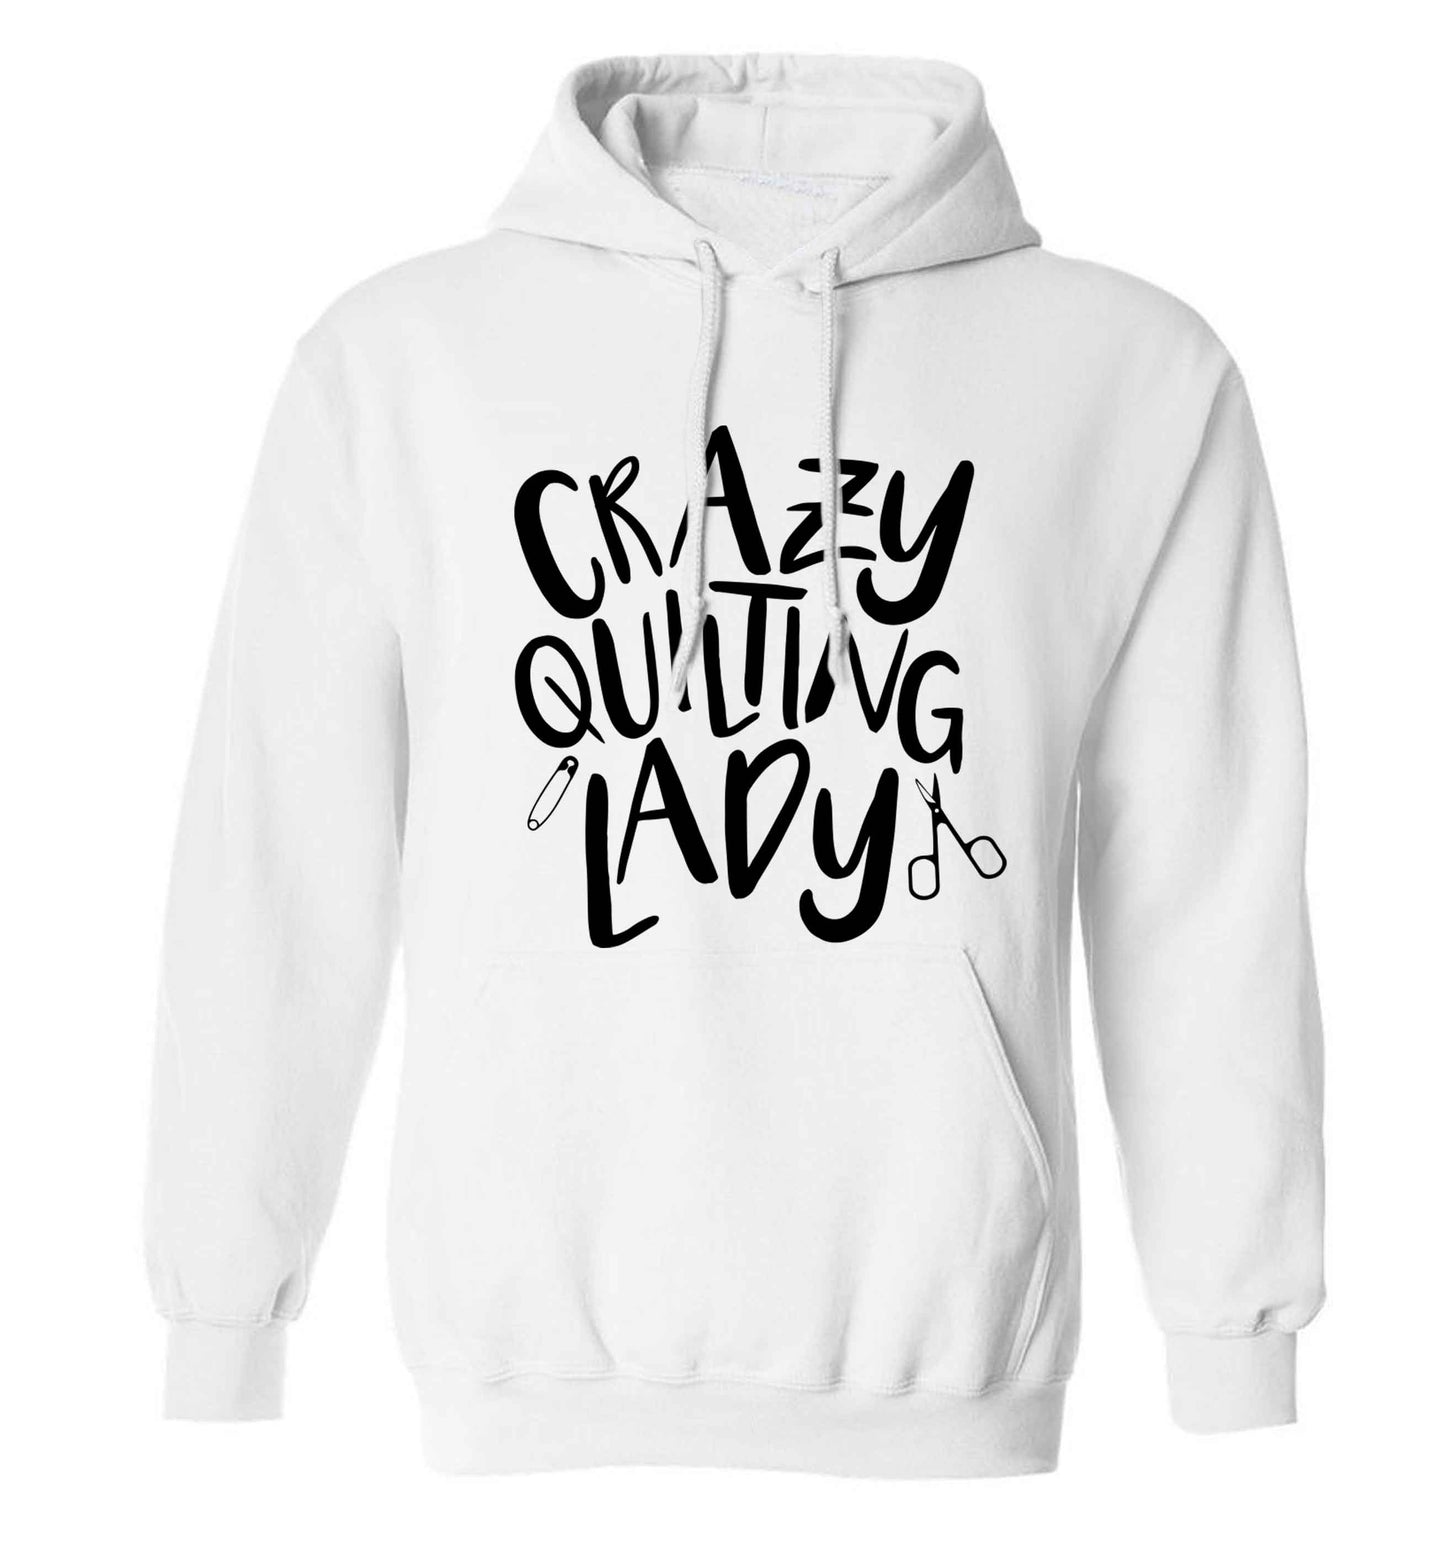 Crazy quilting lady adults unisex white hoodie 2XL